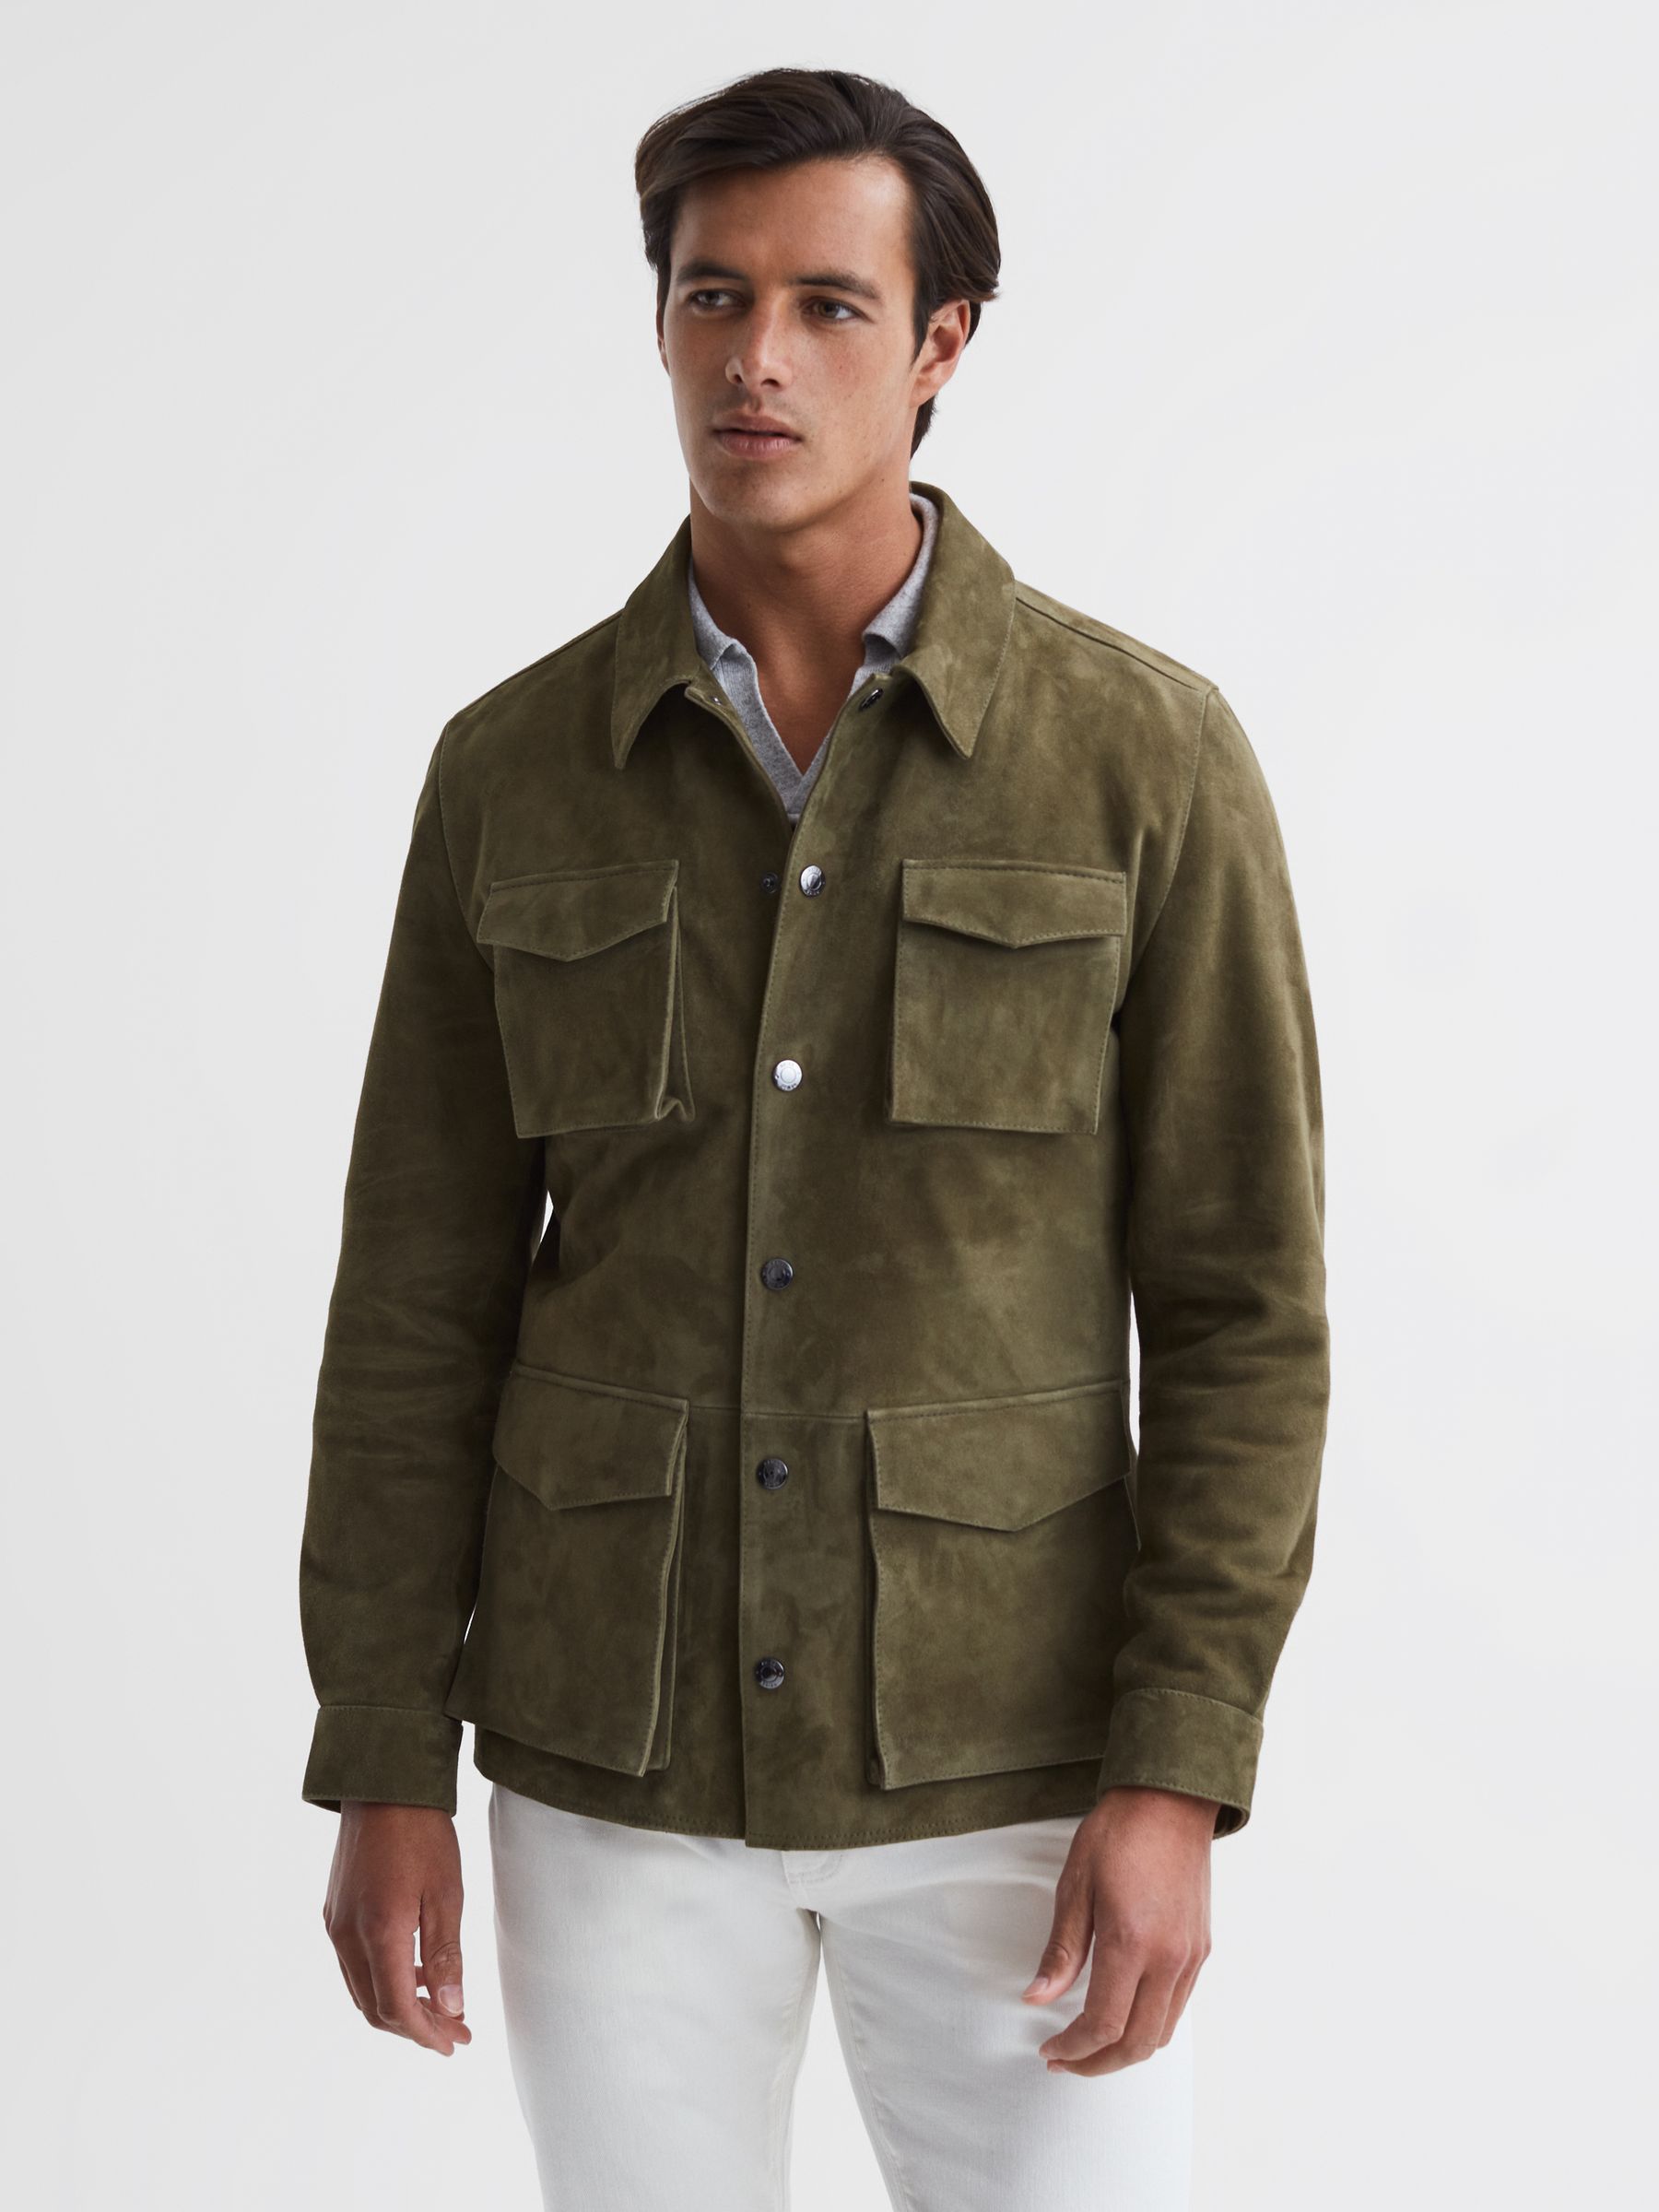 Reiss Mays Suede Long Sleeve Four Pocket Jacket | REISS USA